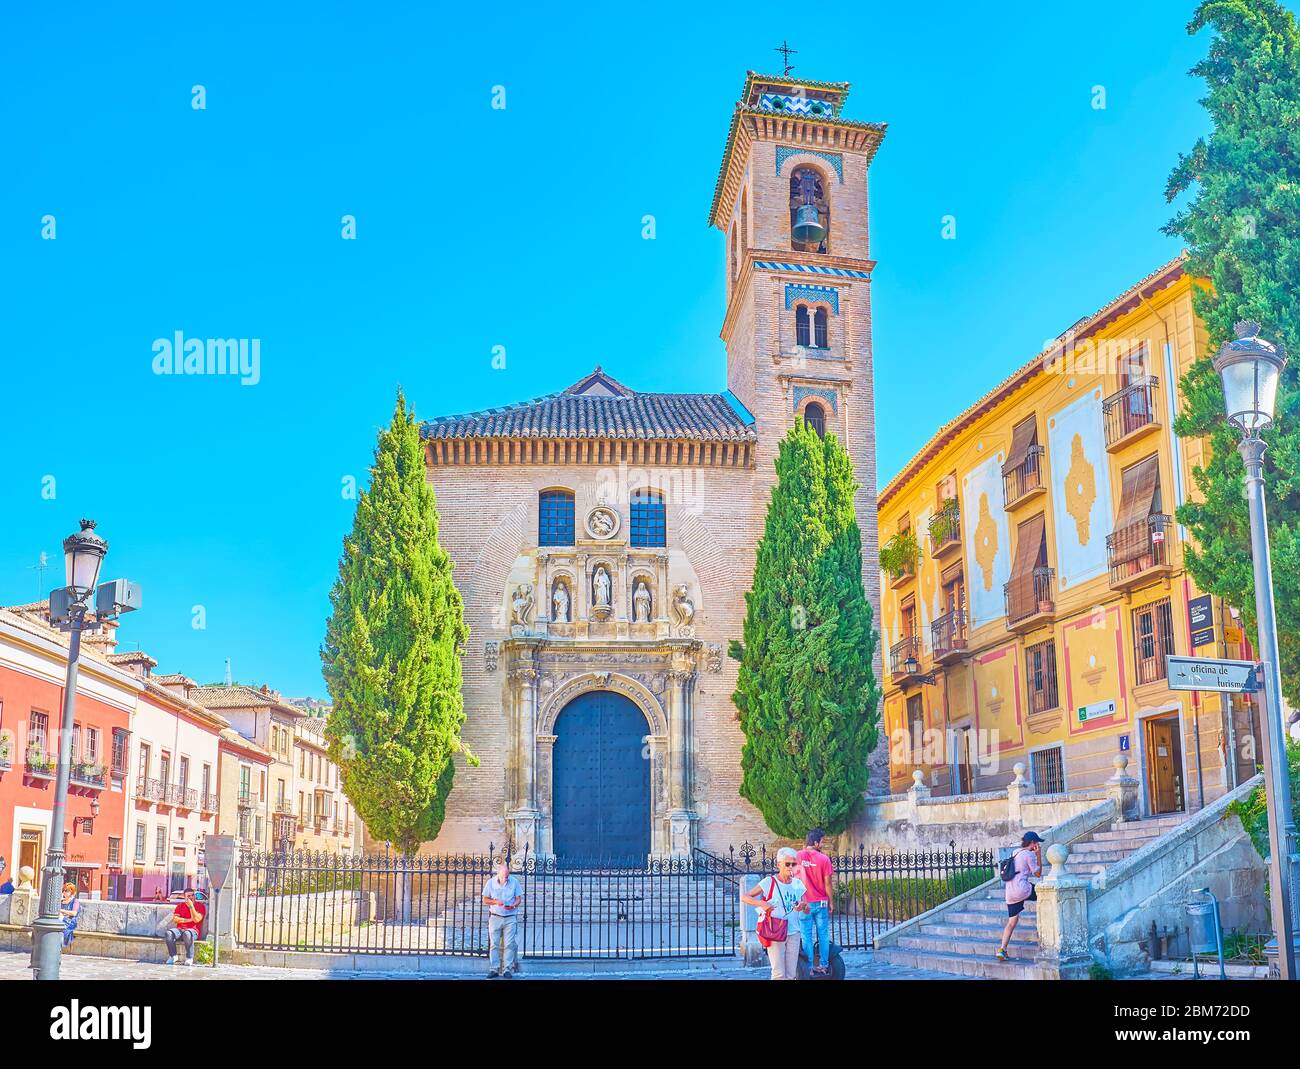 GRANADA, SPAIN - SEPTEMBER 25, 2019: The facade of medieval San Gil and Santa Ana church is decorated with carved stone sculptures, relief patterns an Stock Photo